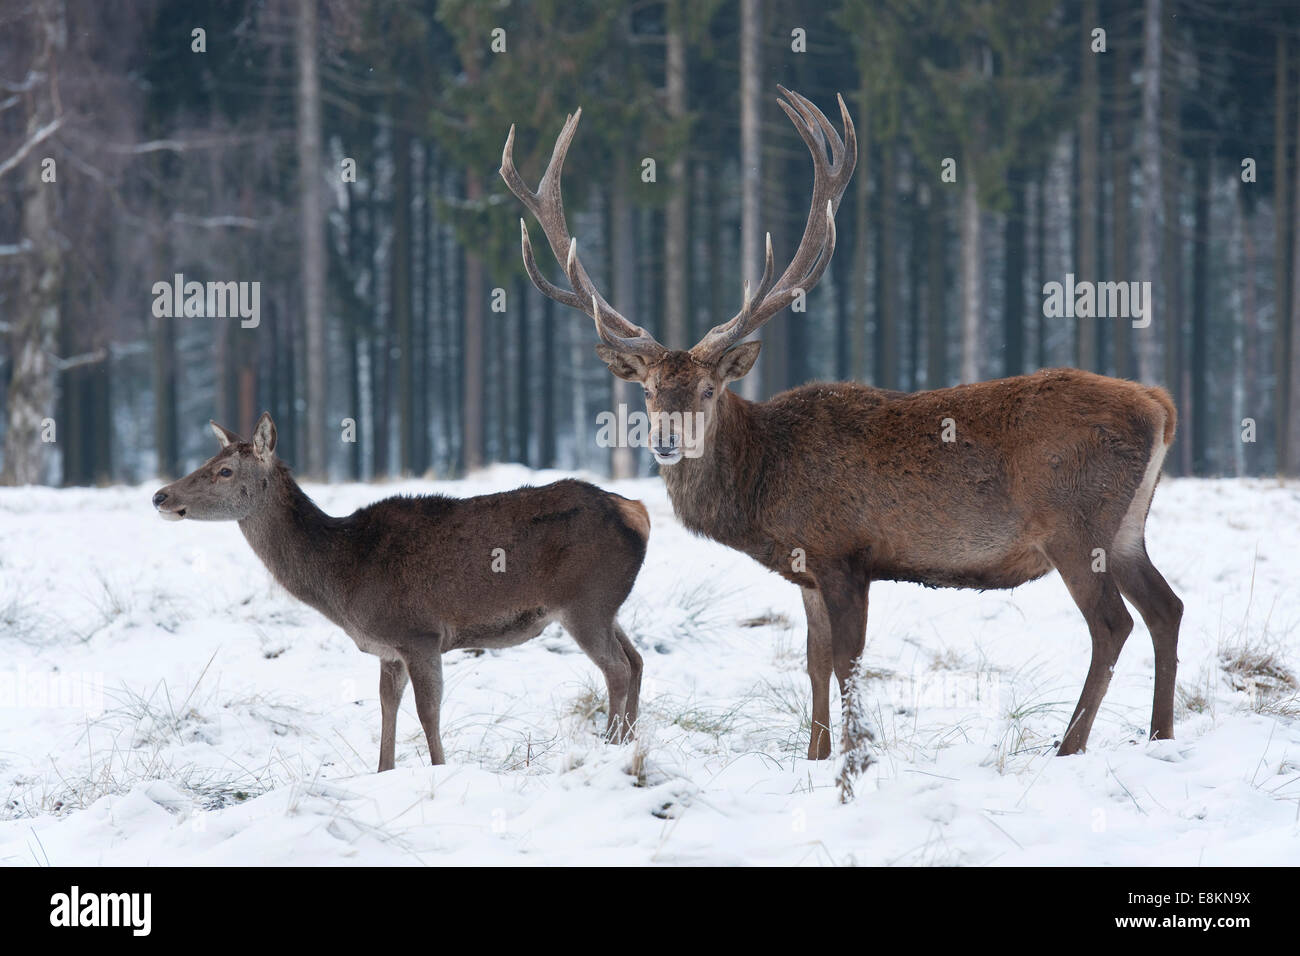 Hind and Stag (Cervus elaphus) standing in the snow, captive, Saxony, Germany Stock Photo